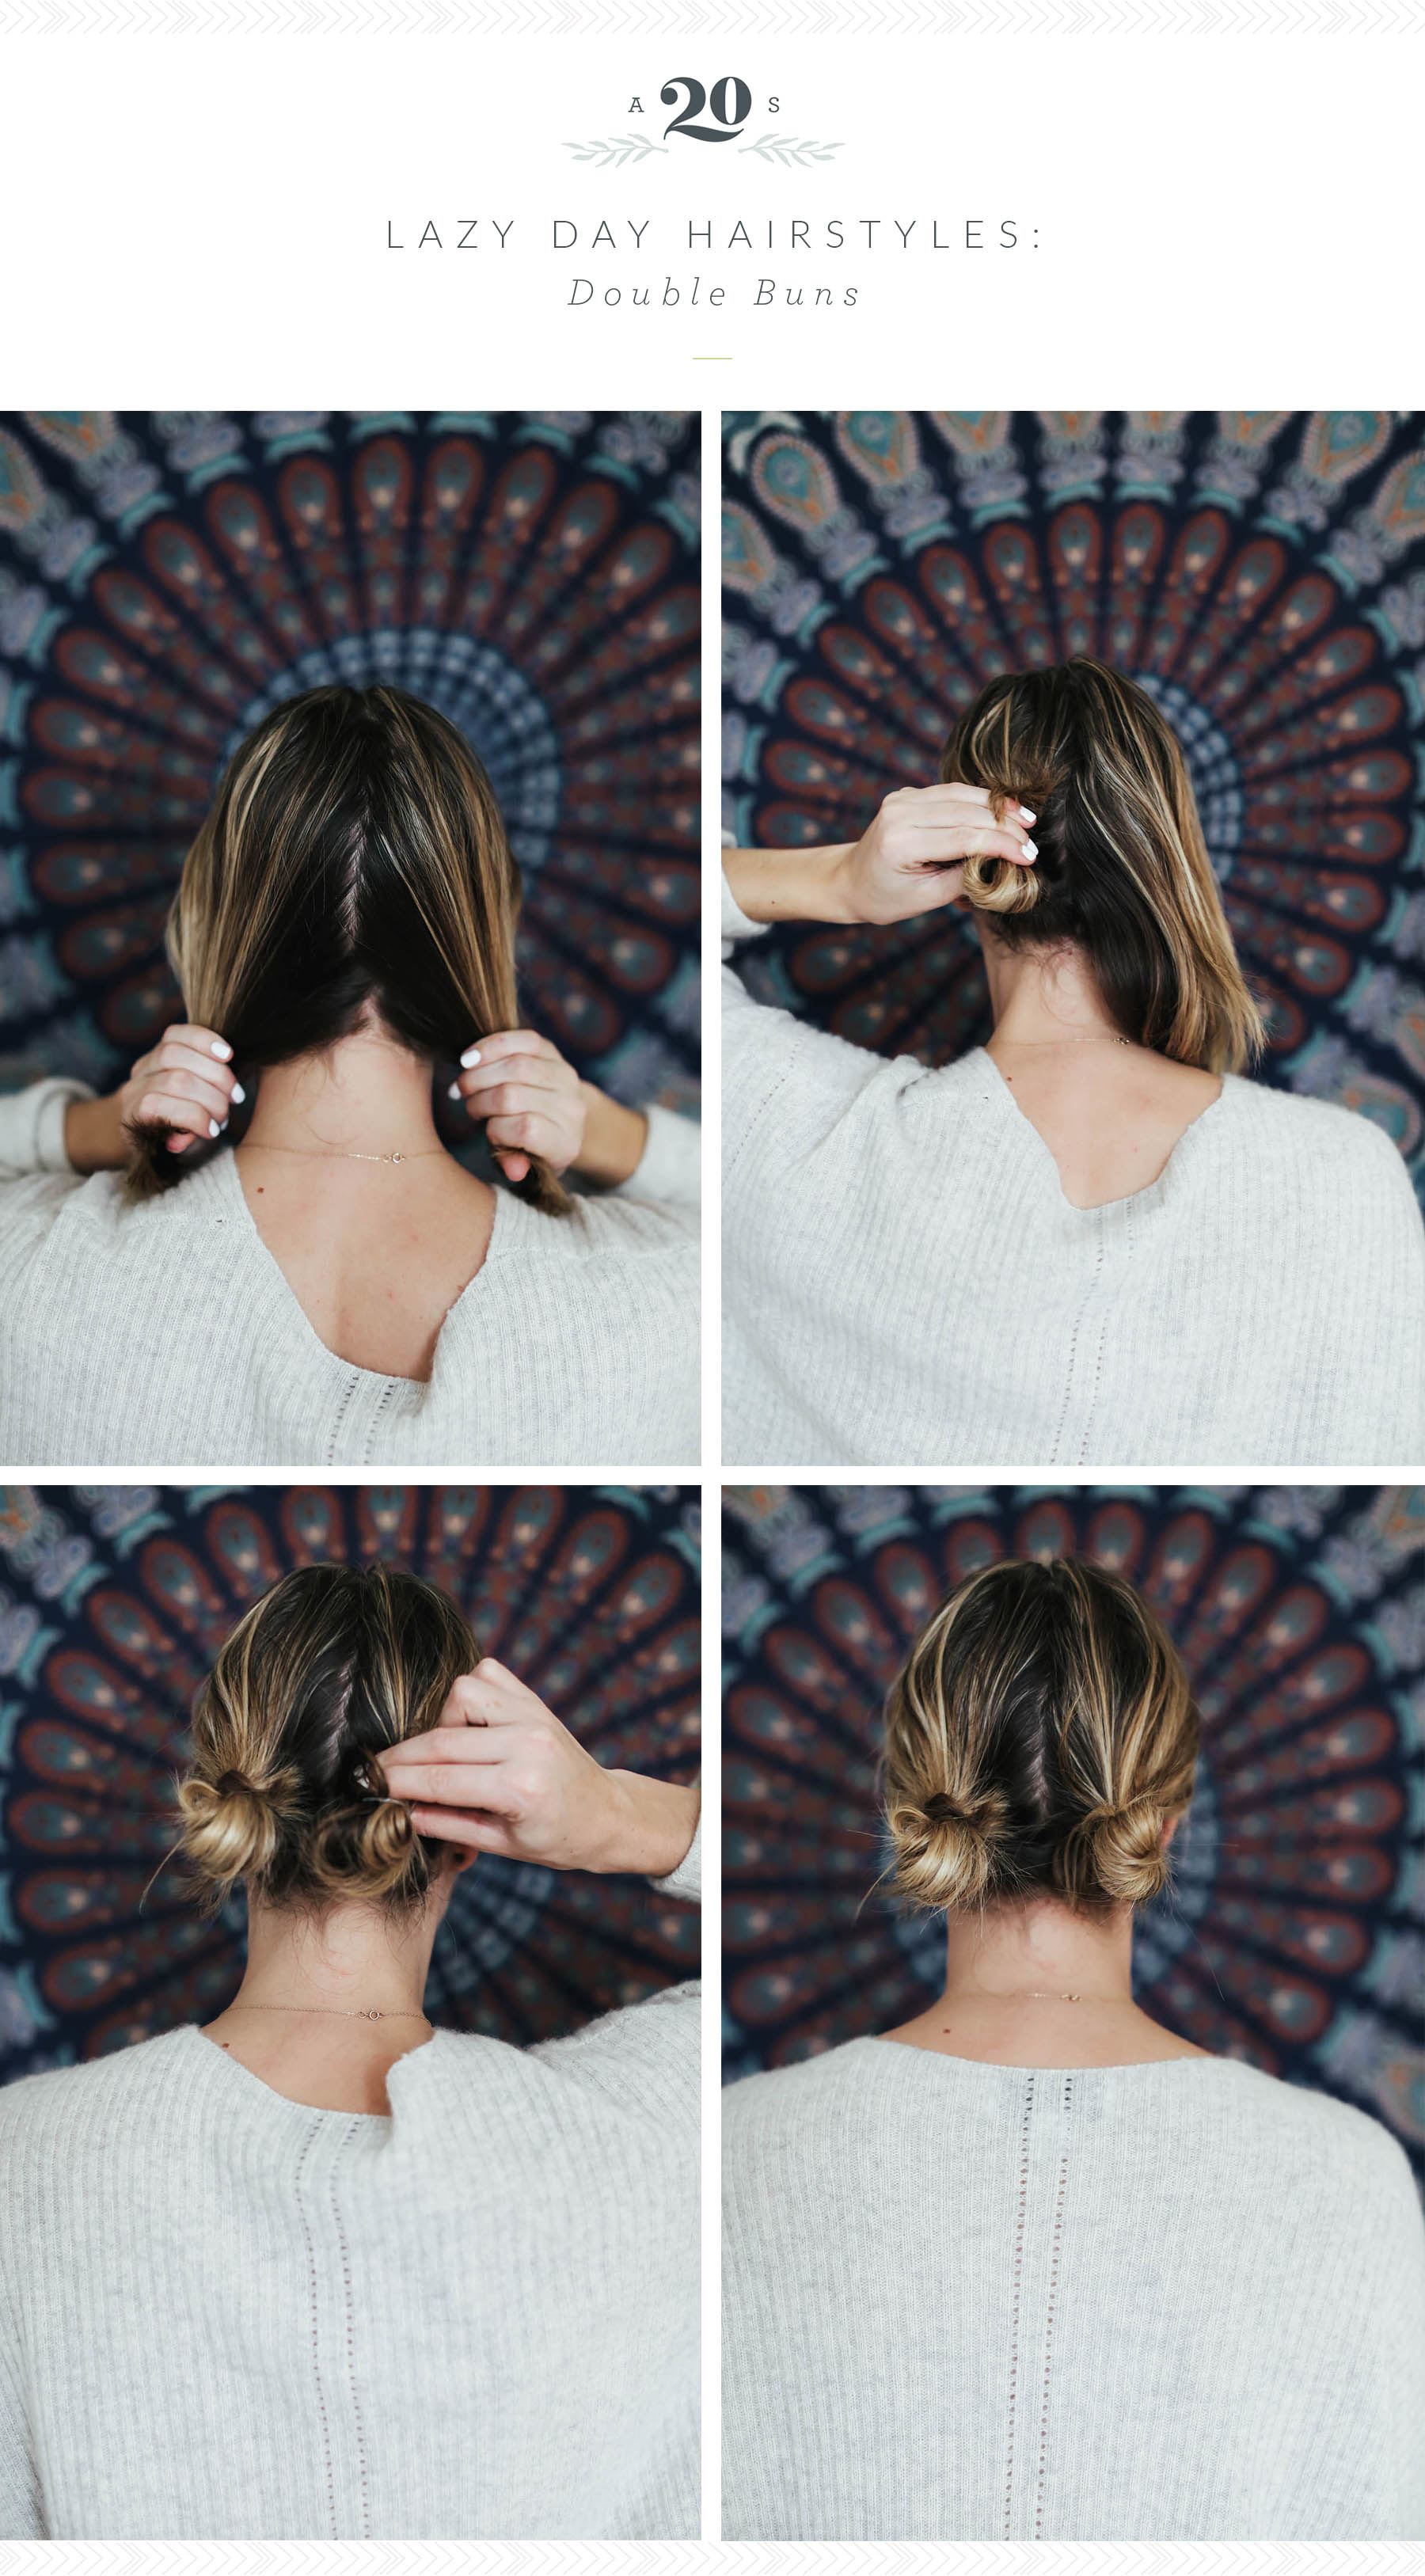 86 Superb Medium Length Hairstyles For An Amazing Look | Medium length hair  styles, Hair lengths, Hairstyles for medium length hair easy